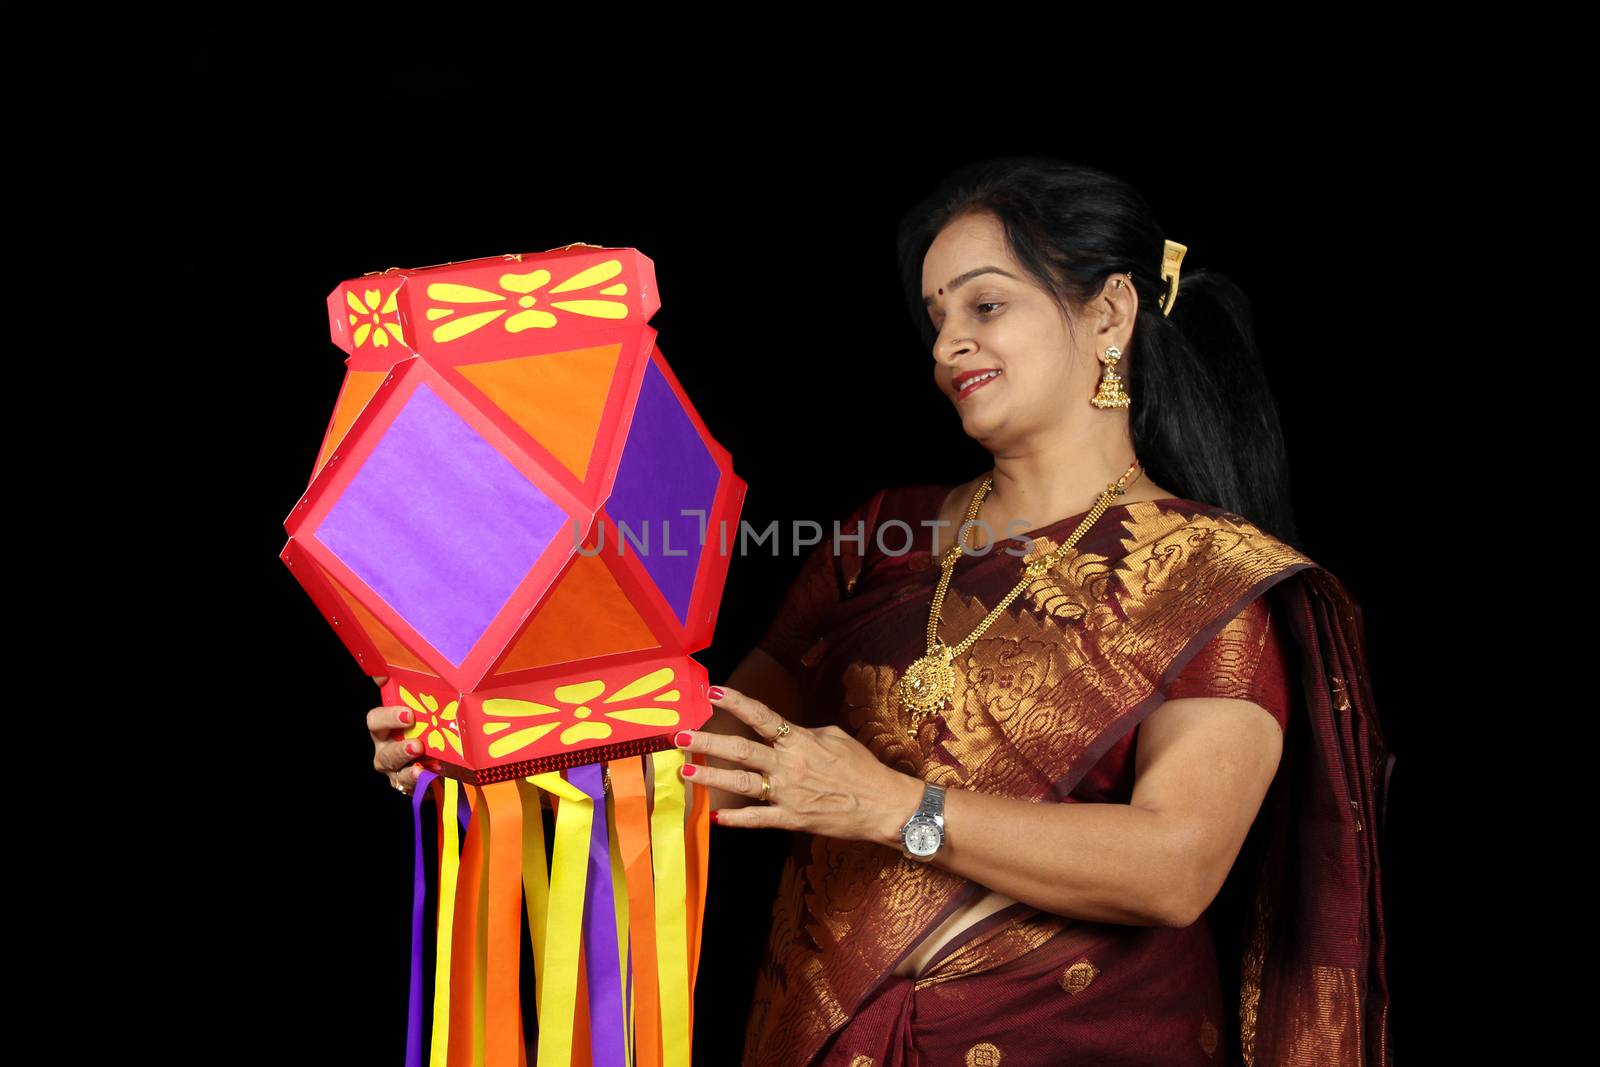 Indian Woman with Lantern by thefinalmiracle